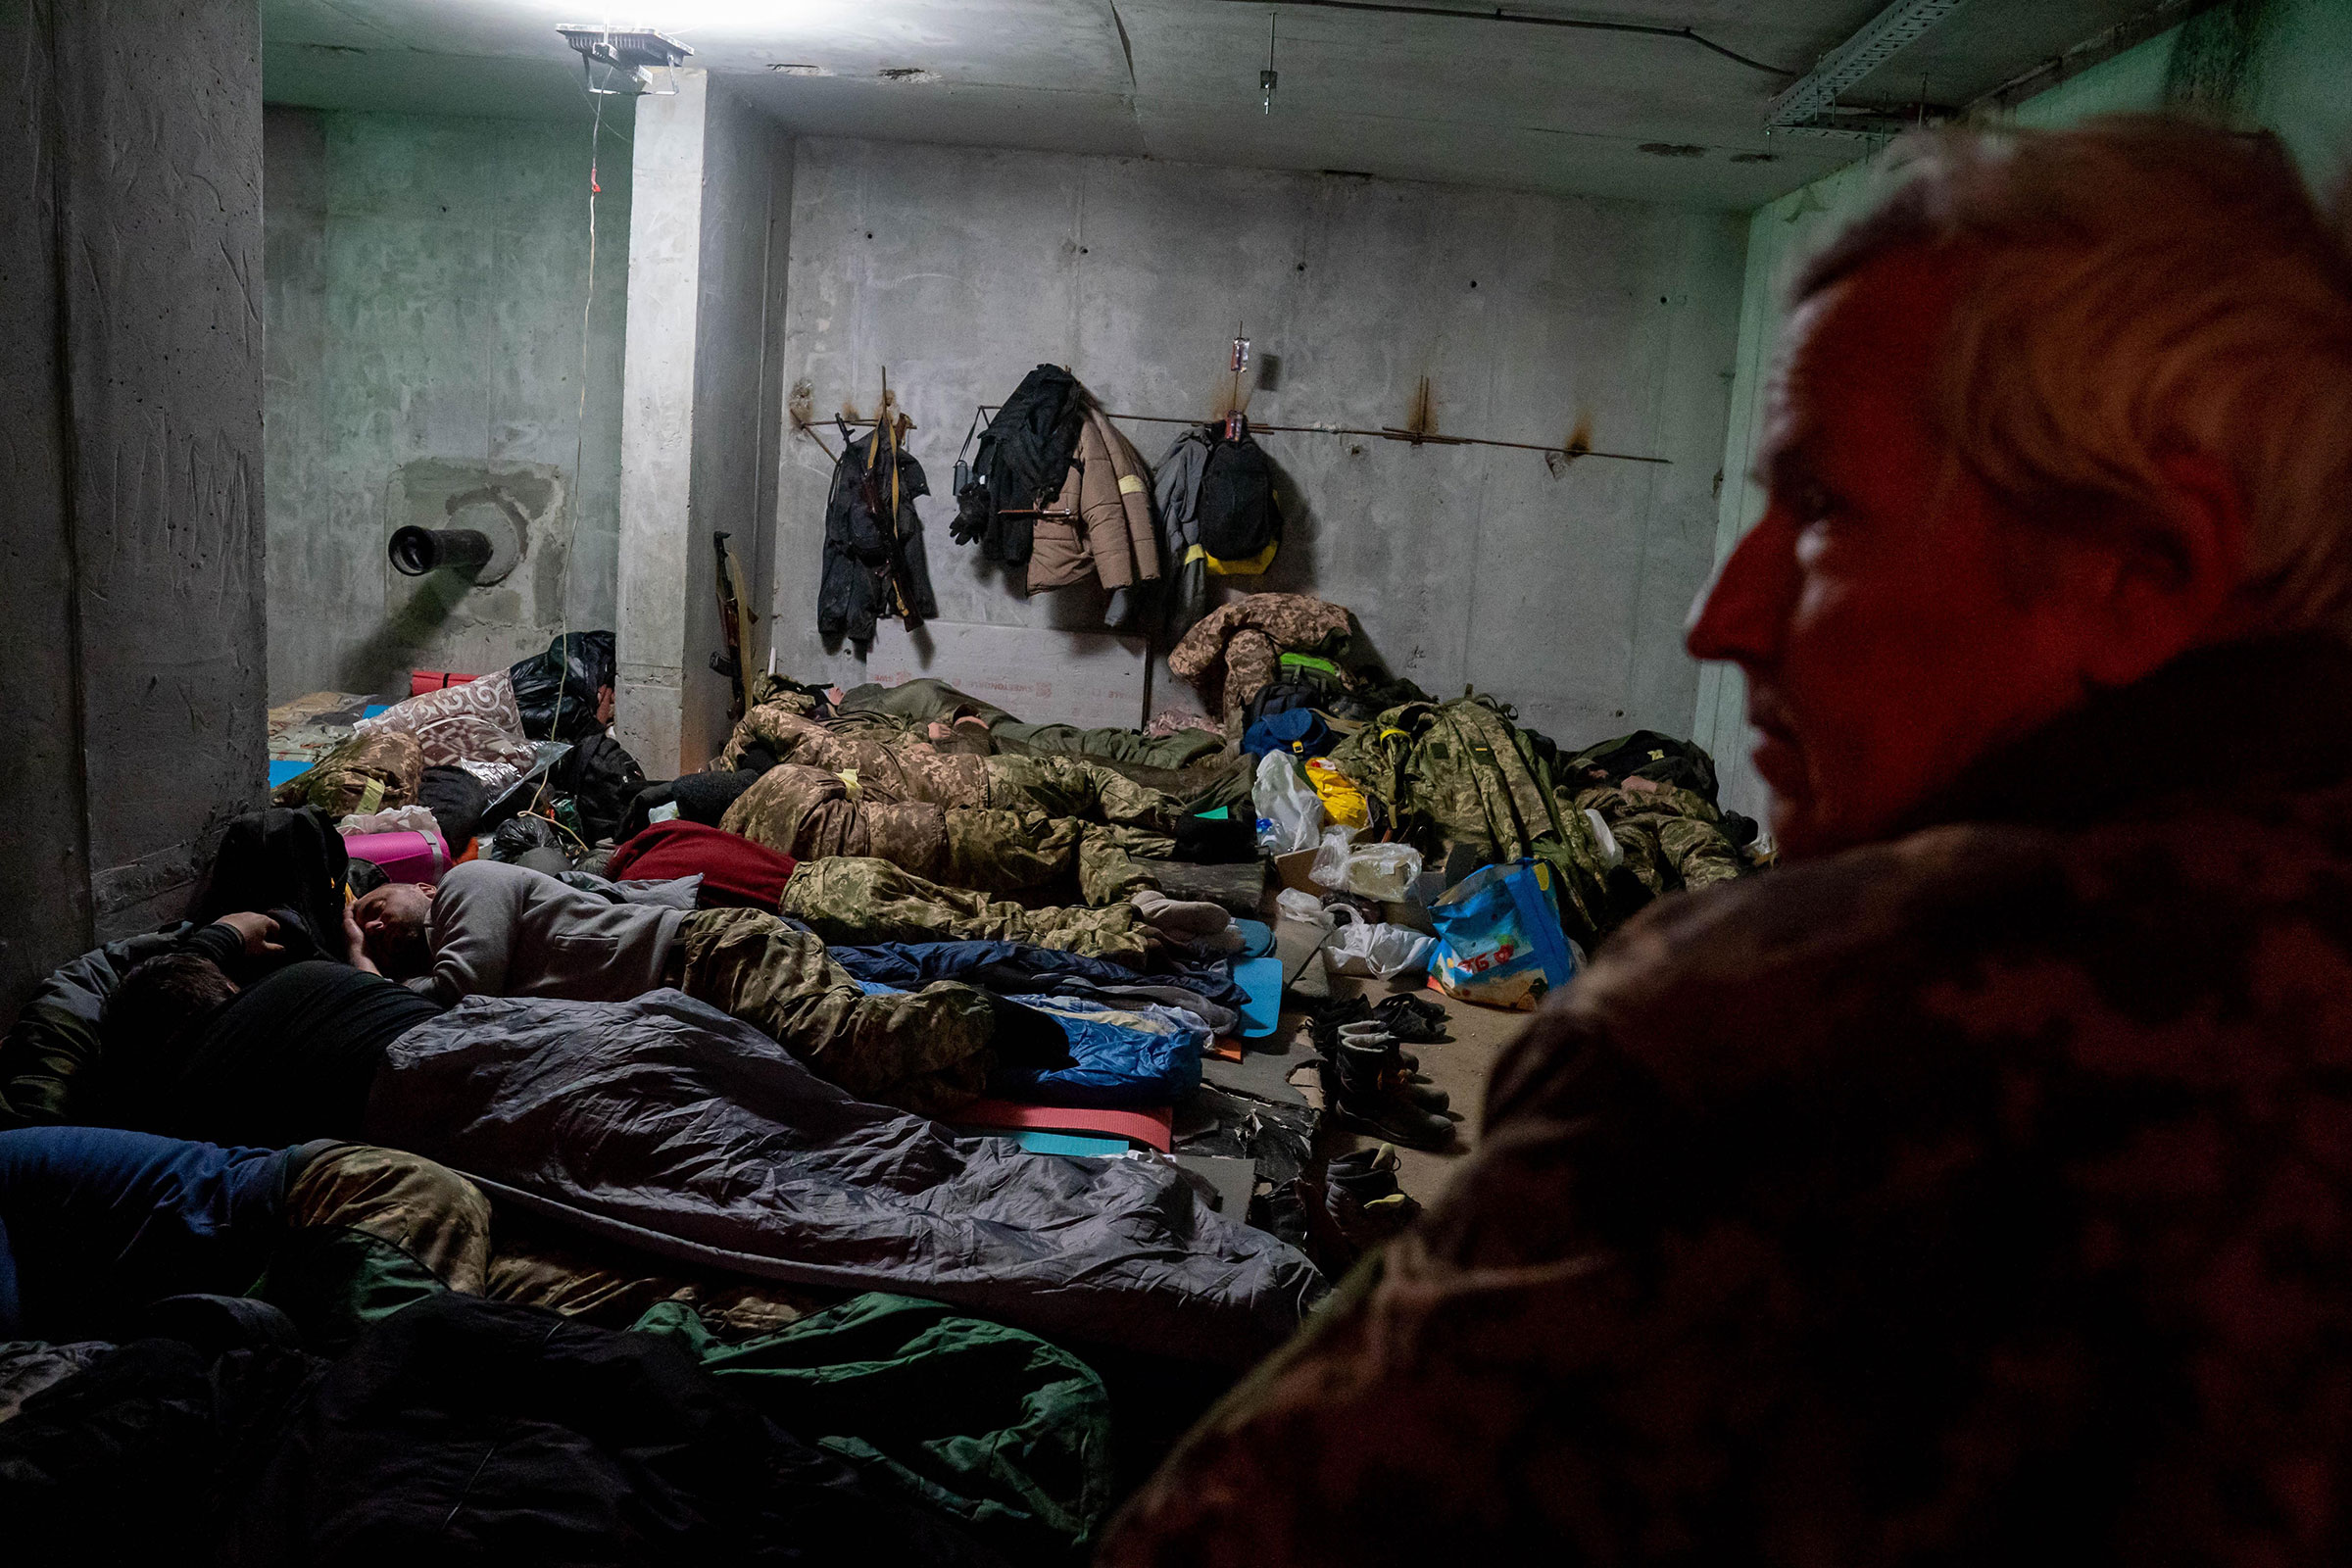 Photos: Ukrainian citizens volunteer to defend and fight Russia